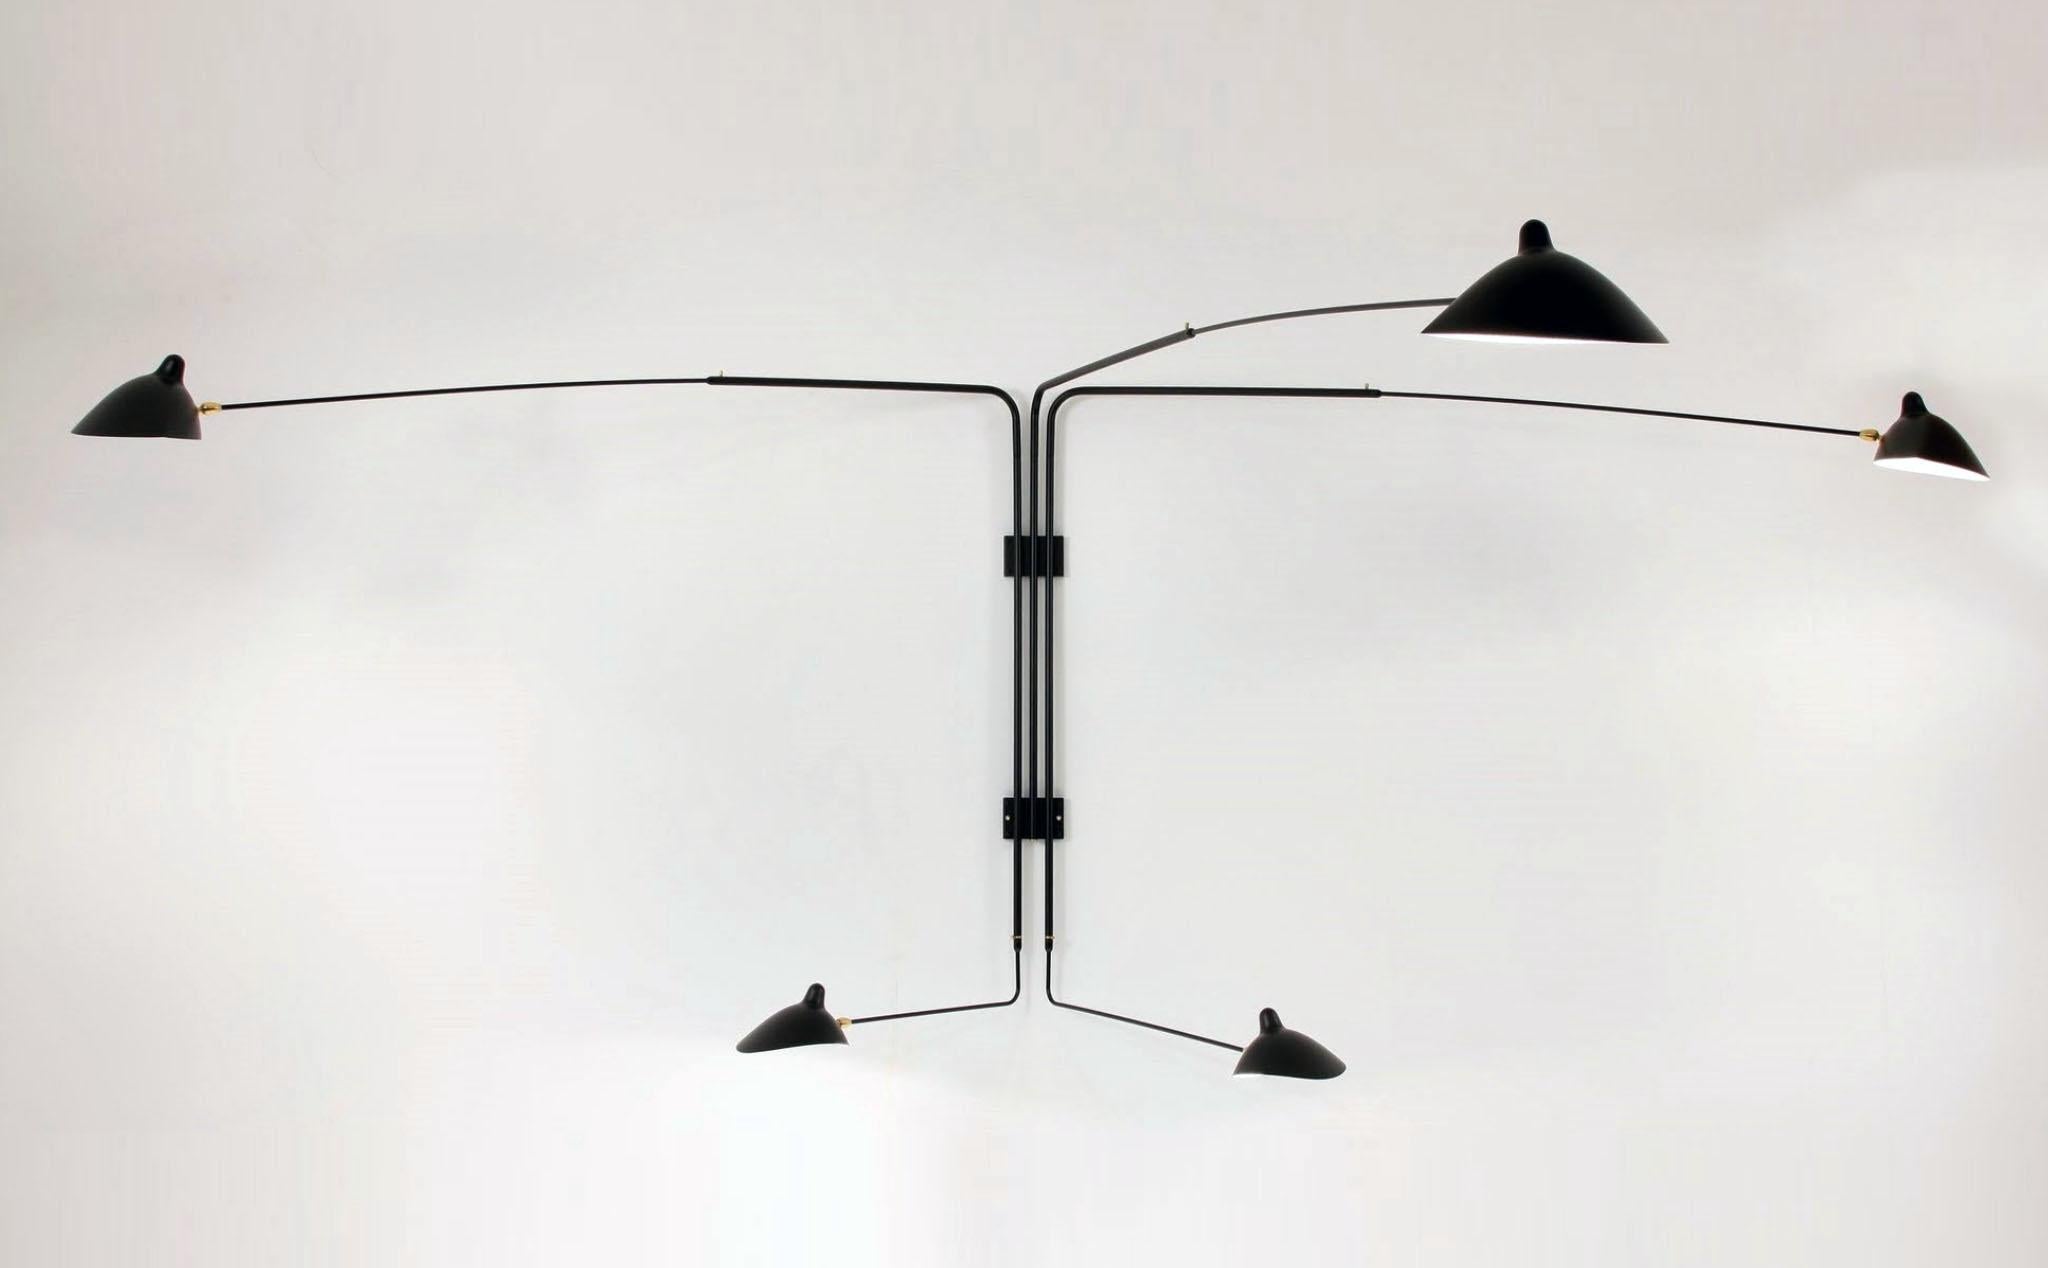 A larger sconce with two identical long arms and three shorter arms of varying lengths, this lamp can illuminate a large area of a wall or room. Each lamp head rotates and tilts.

Available in white or black with brass fittings.

COLOR